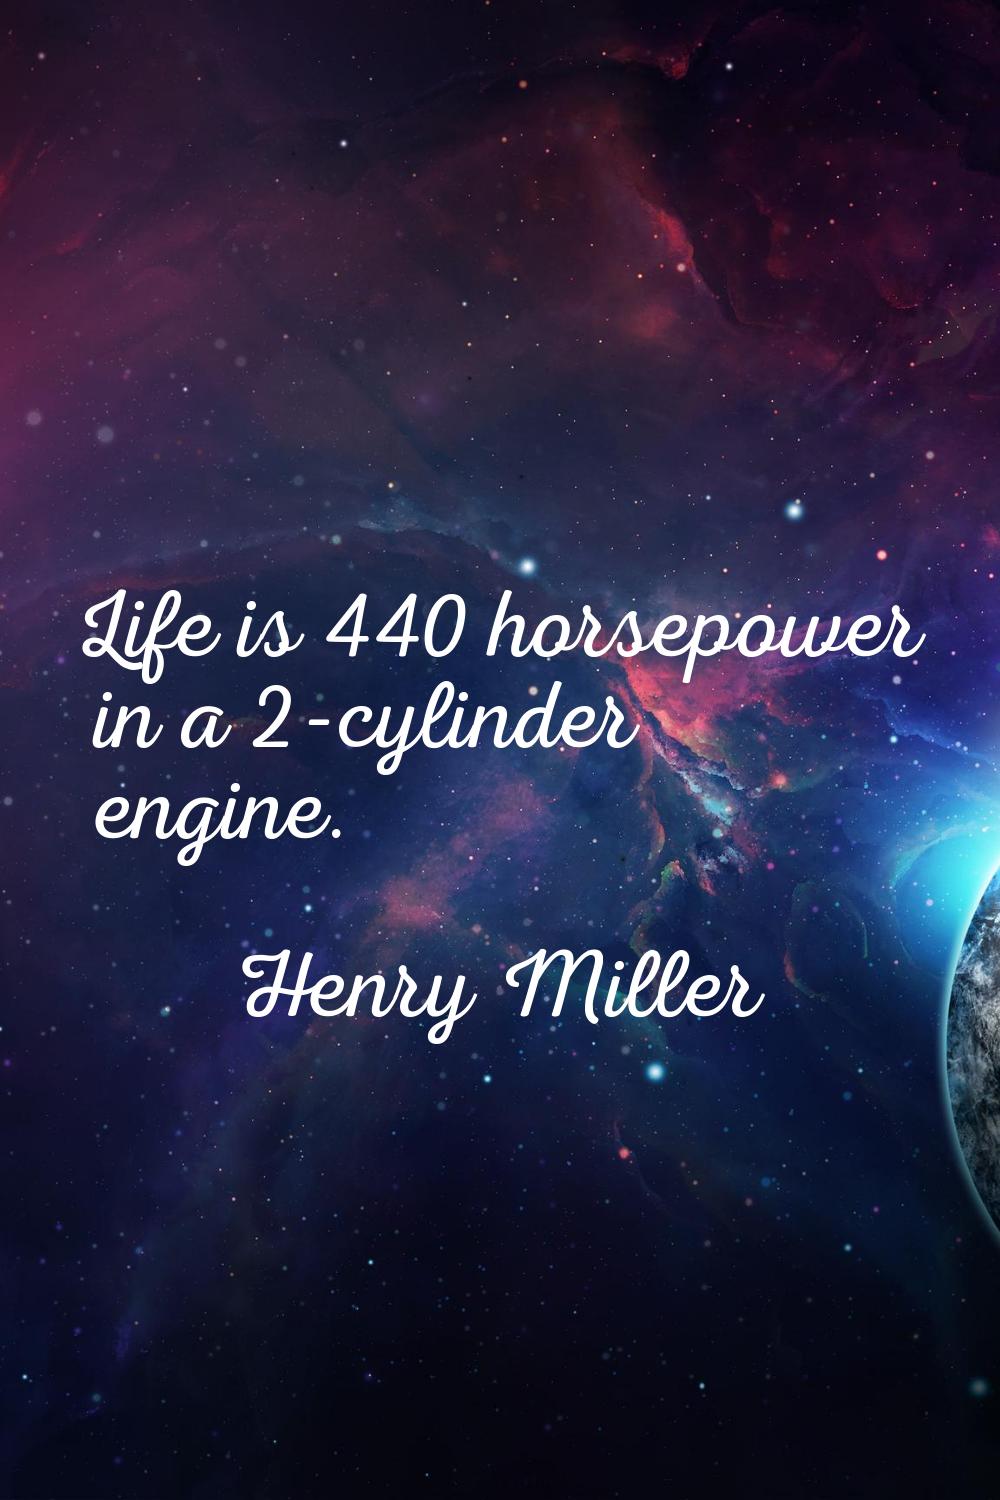 Life is 440 horsepower in a 2-cylinder engine.